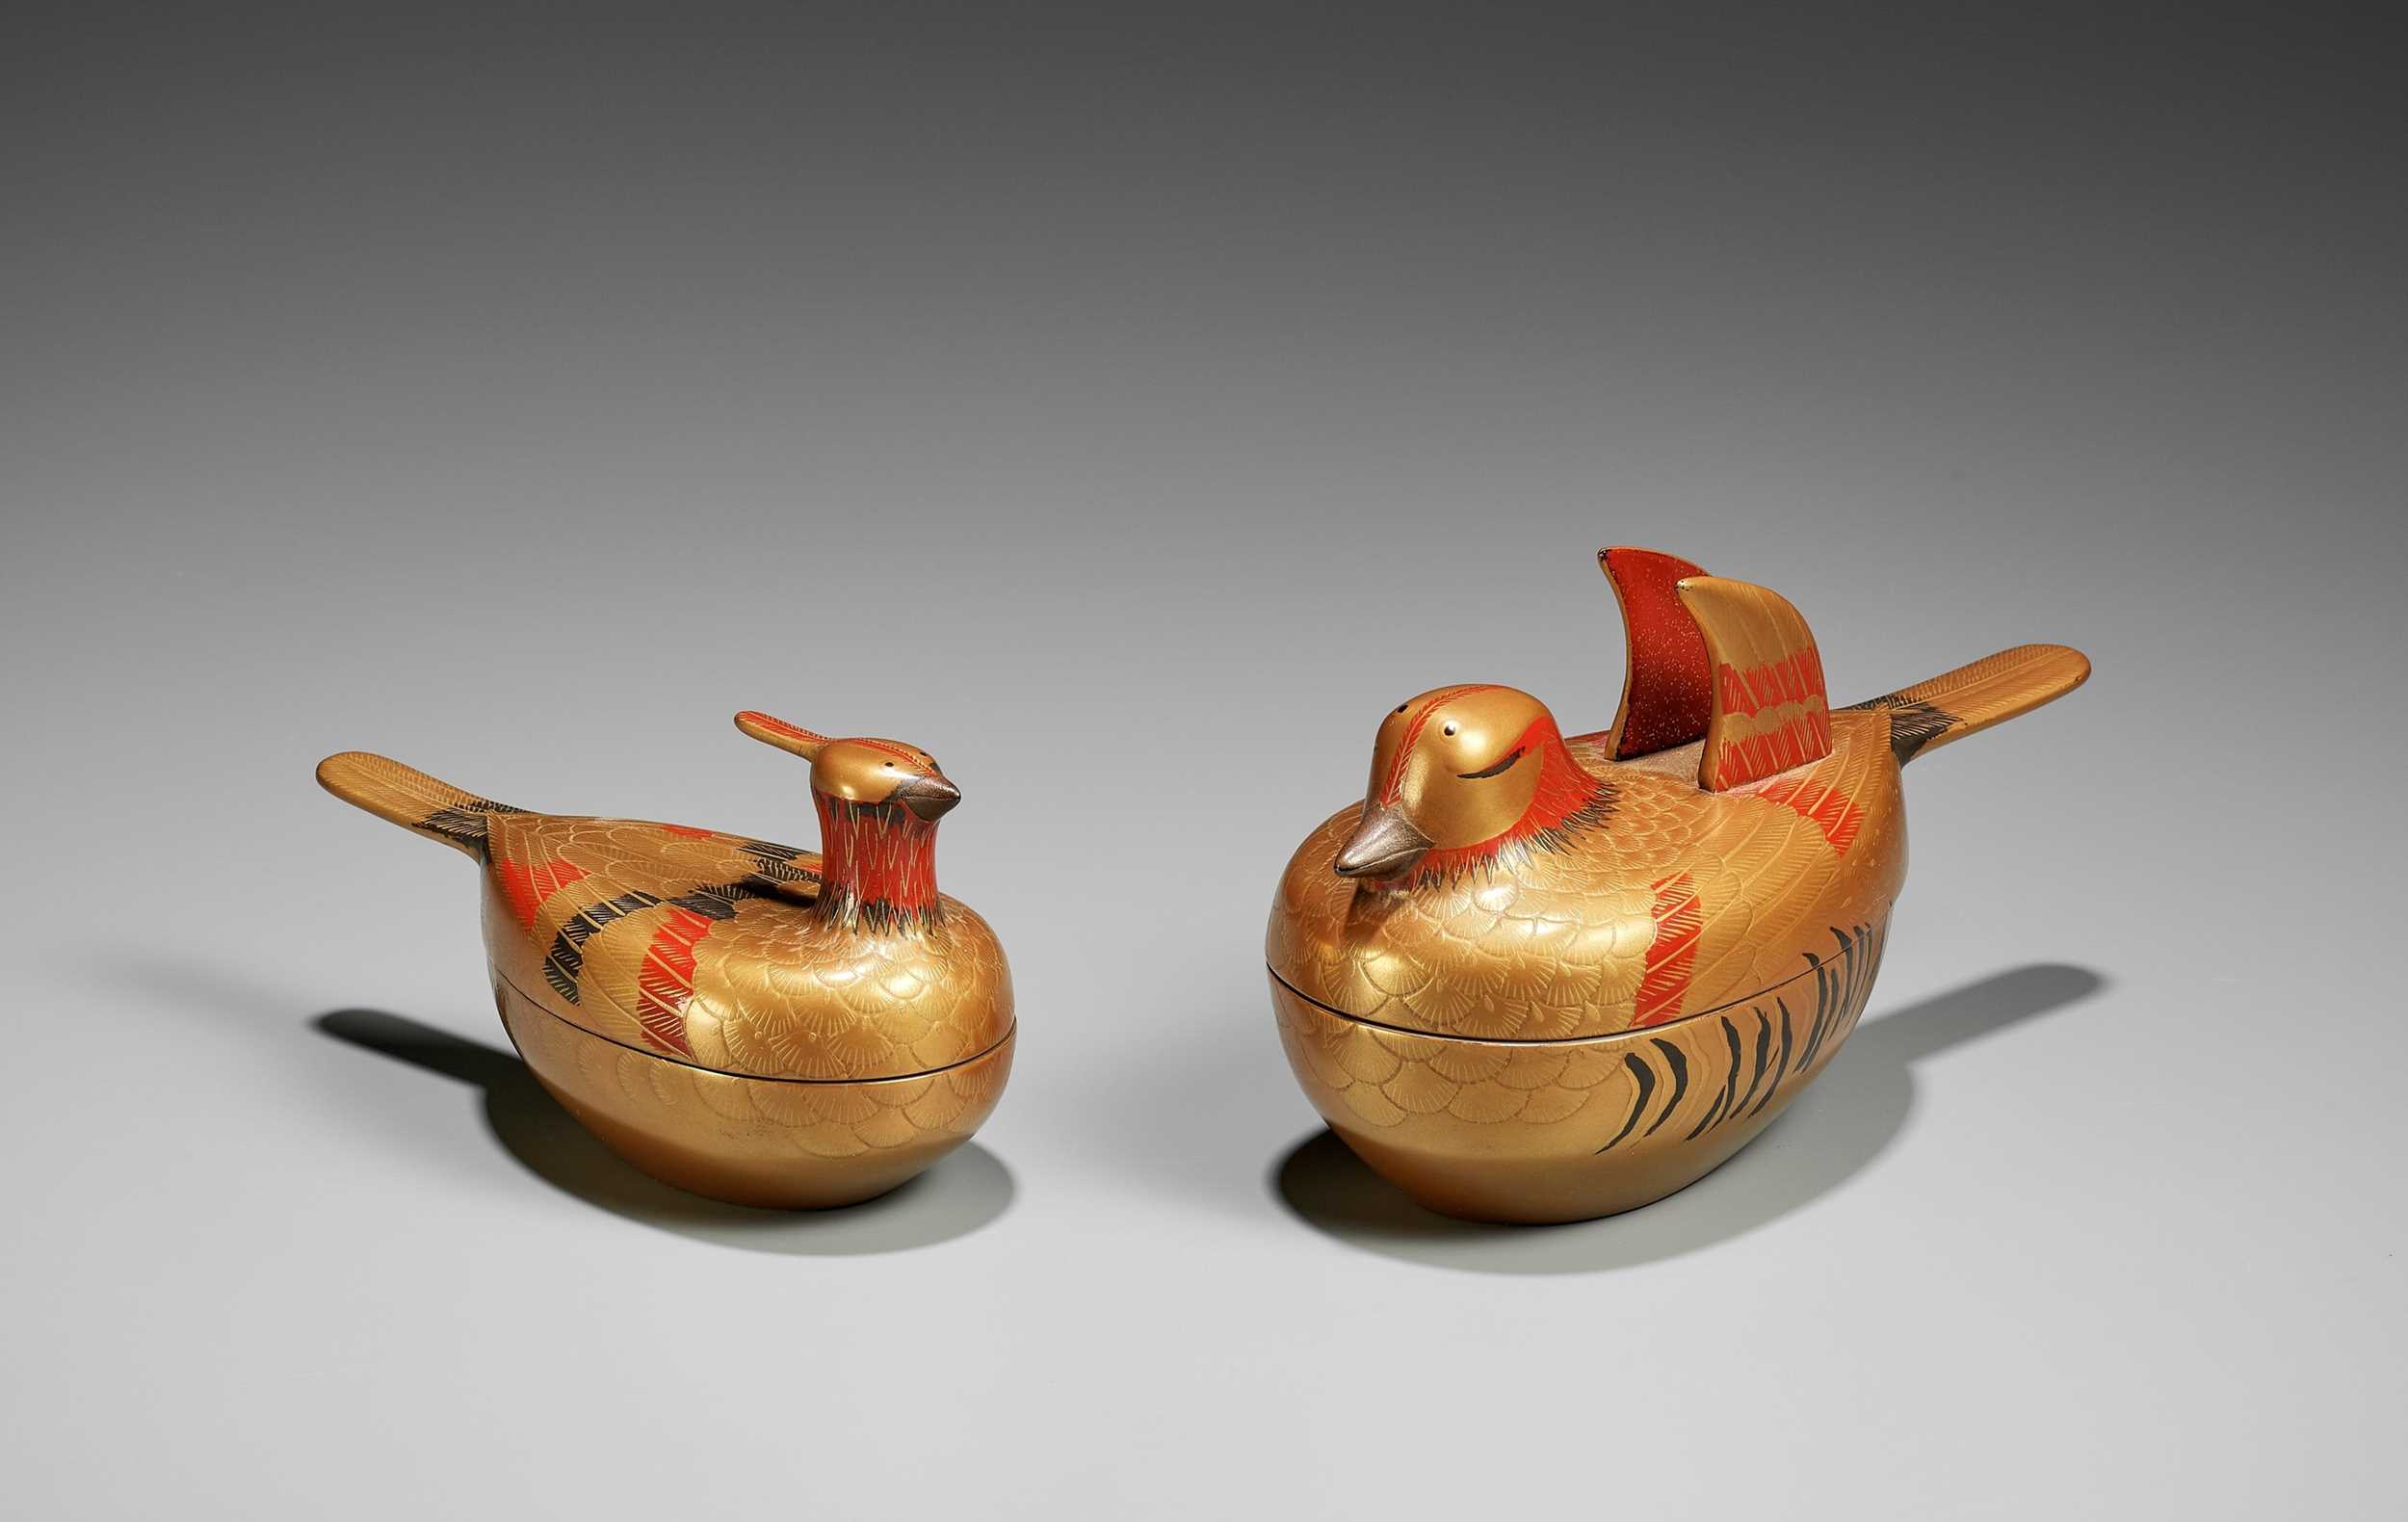 Lot 121 - A PAIR OF GOLD LACQUER DUCK-FORM KOGO (INCENSE BOXES) AND COVERS